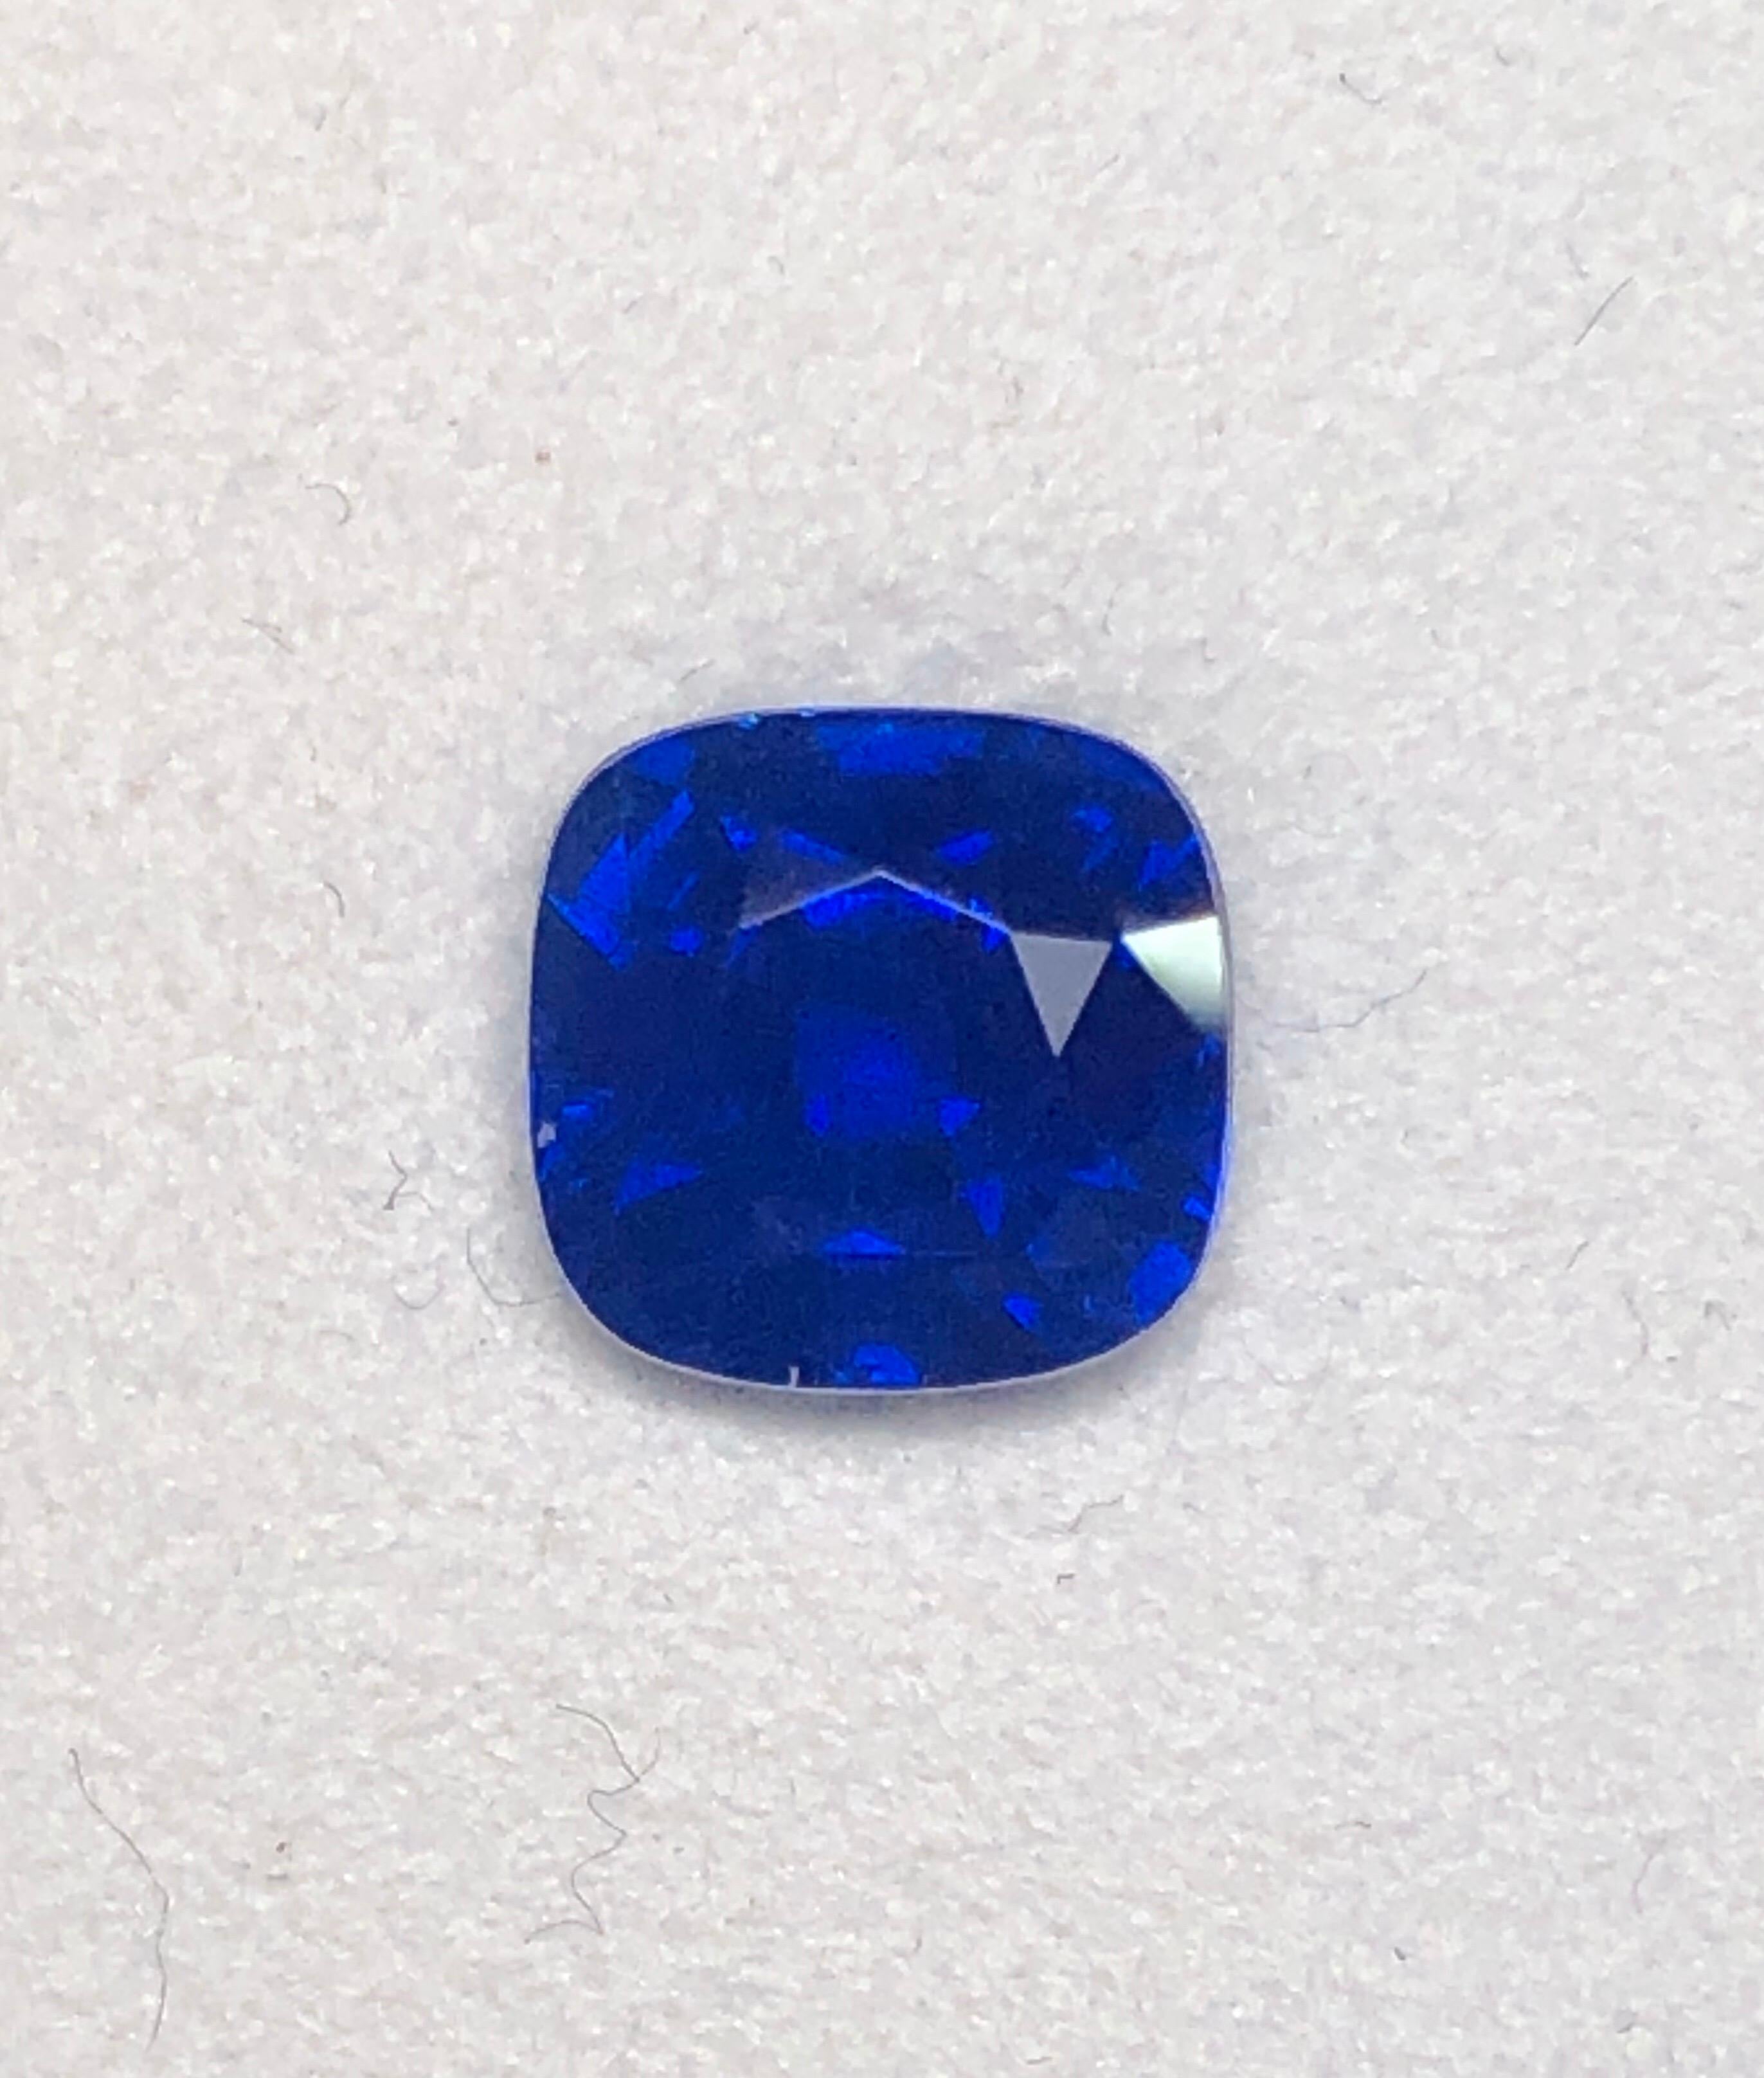 This extraordinary 3 carat plus, unheated Kashmir Sapphire, recognized with the esteemed 